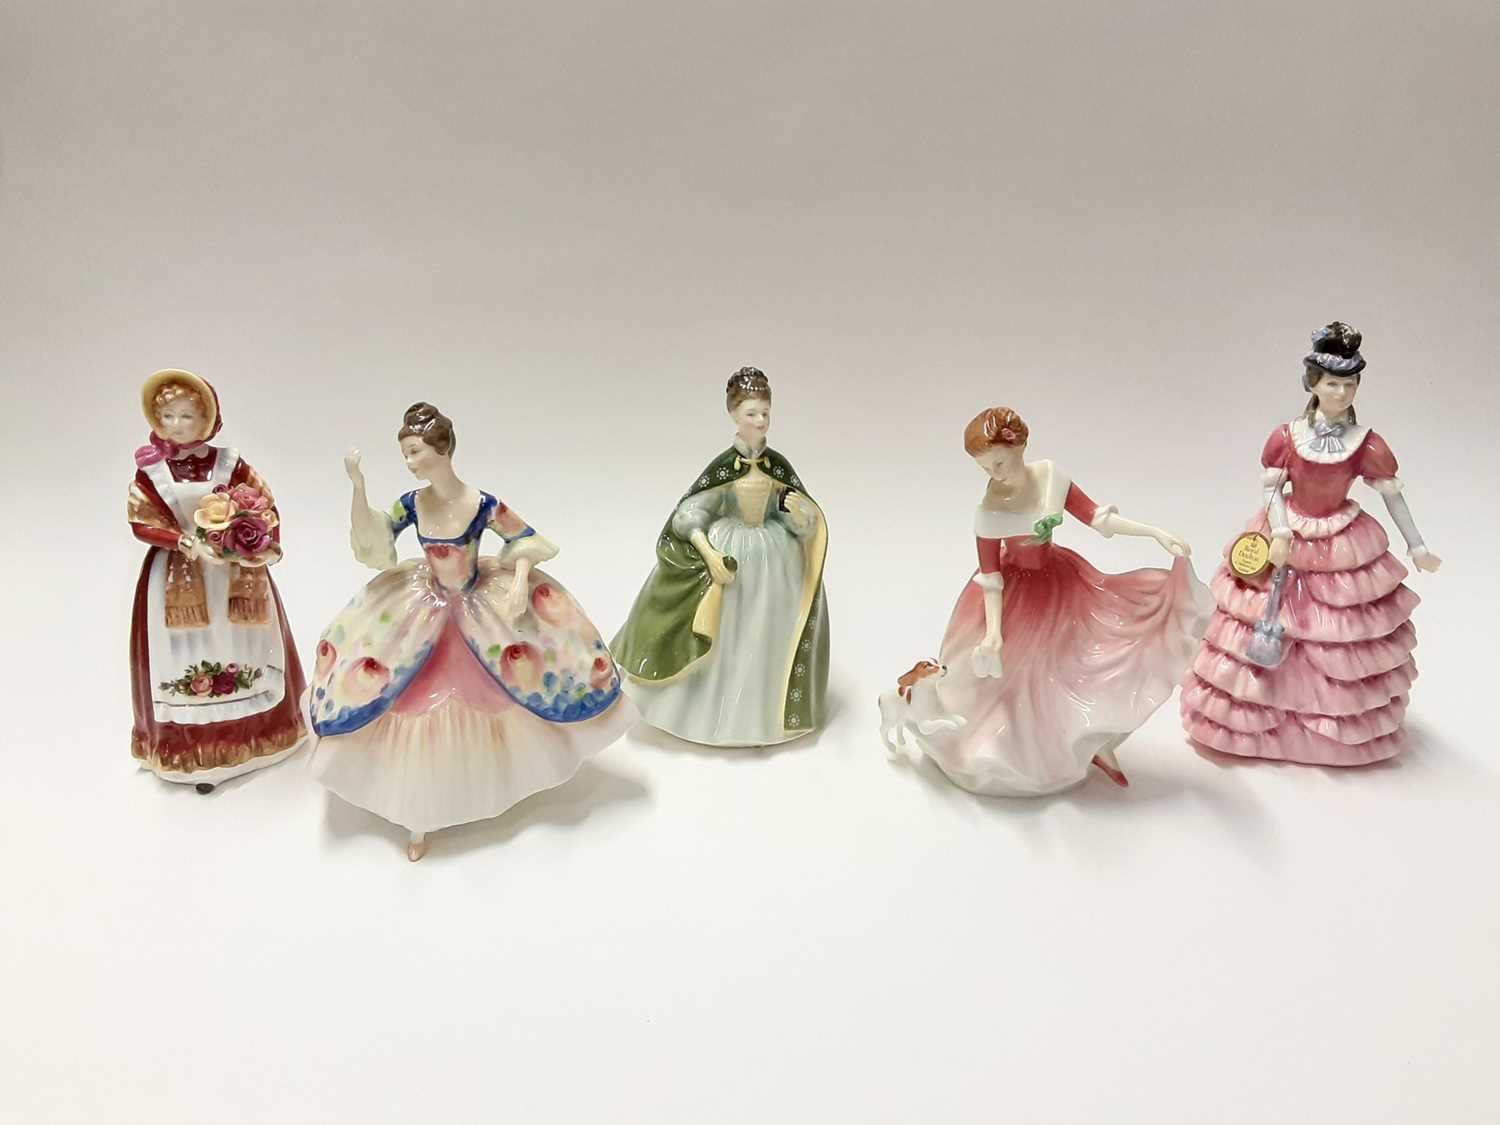 Lot 77 - Five Royal Doulton figures - Christine HN2792, Old Country Roses HN3692, Premiere HN2343, Diane HN3604 and My Best Friend HN3011